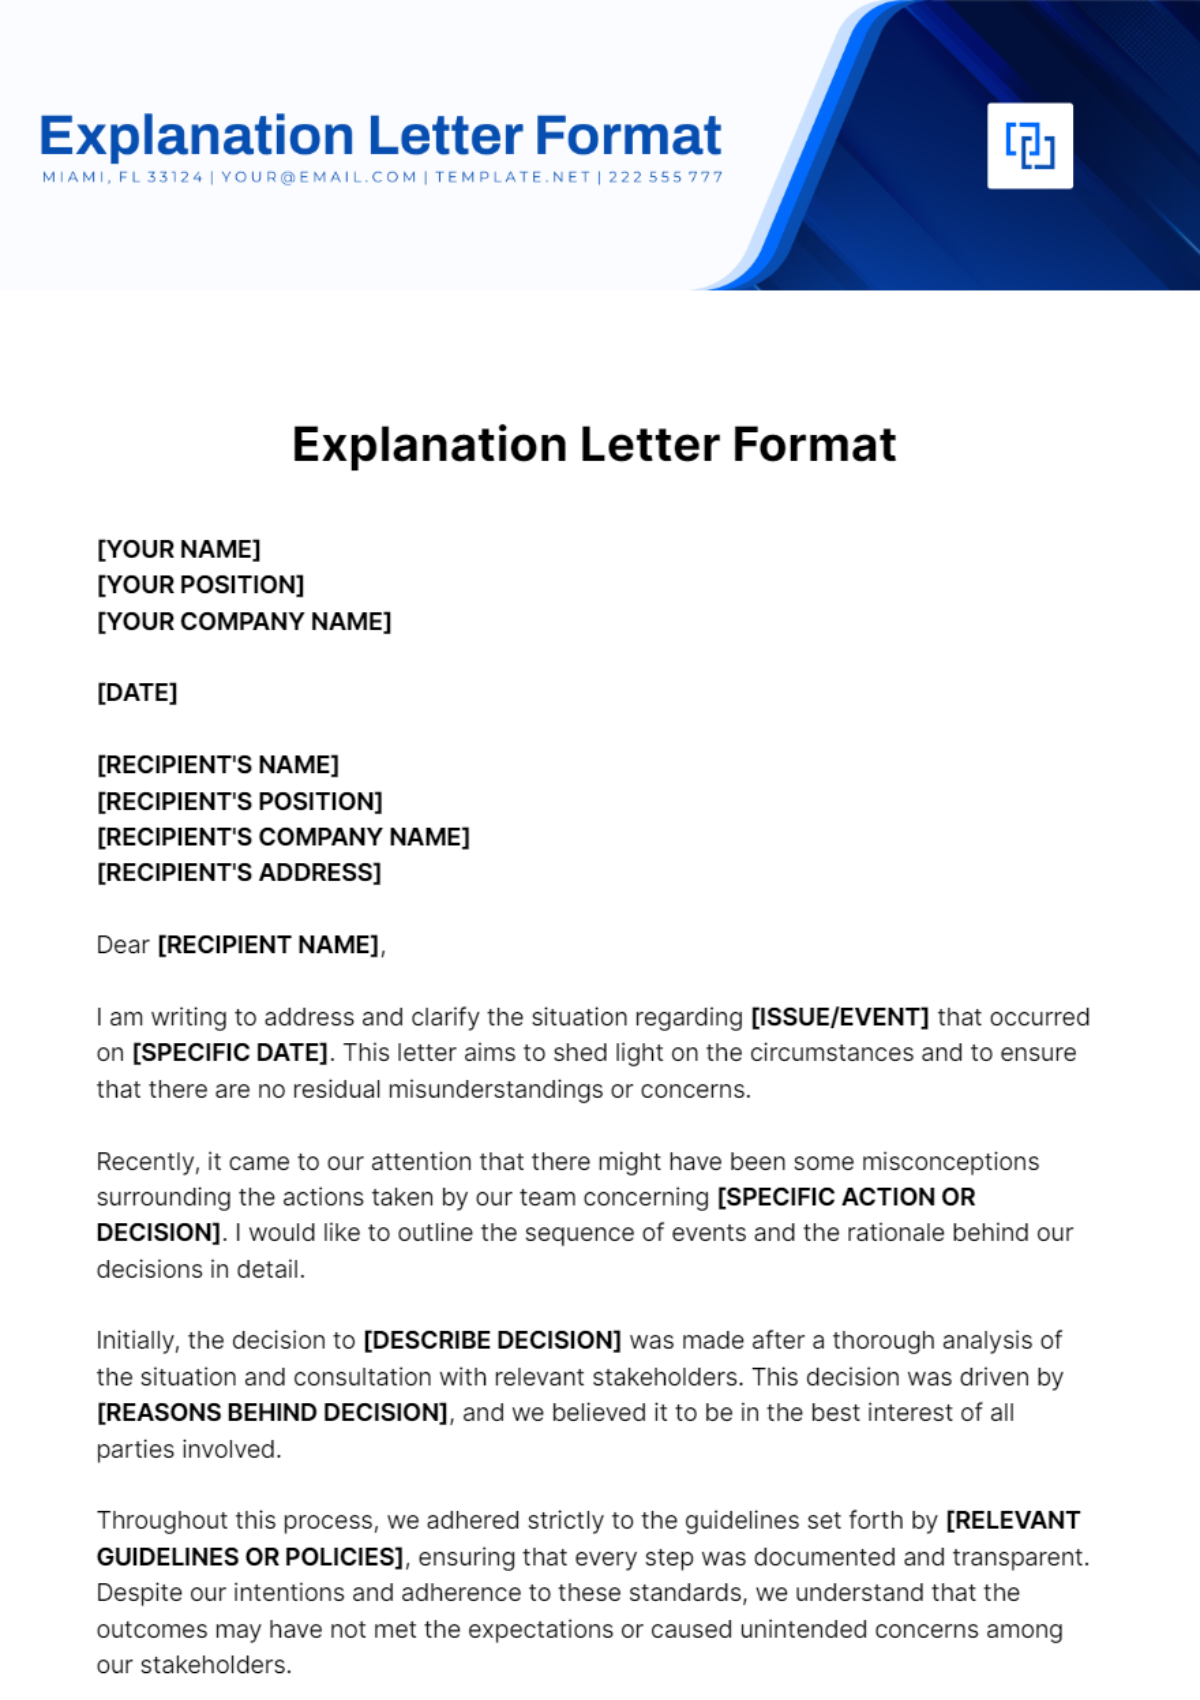 Explanation Letter Format Template